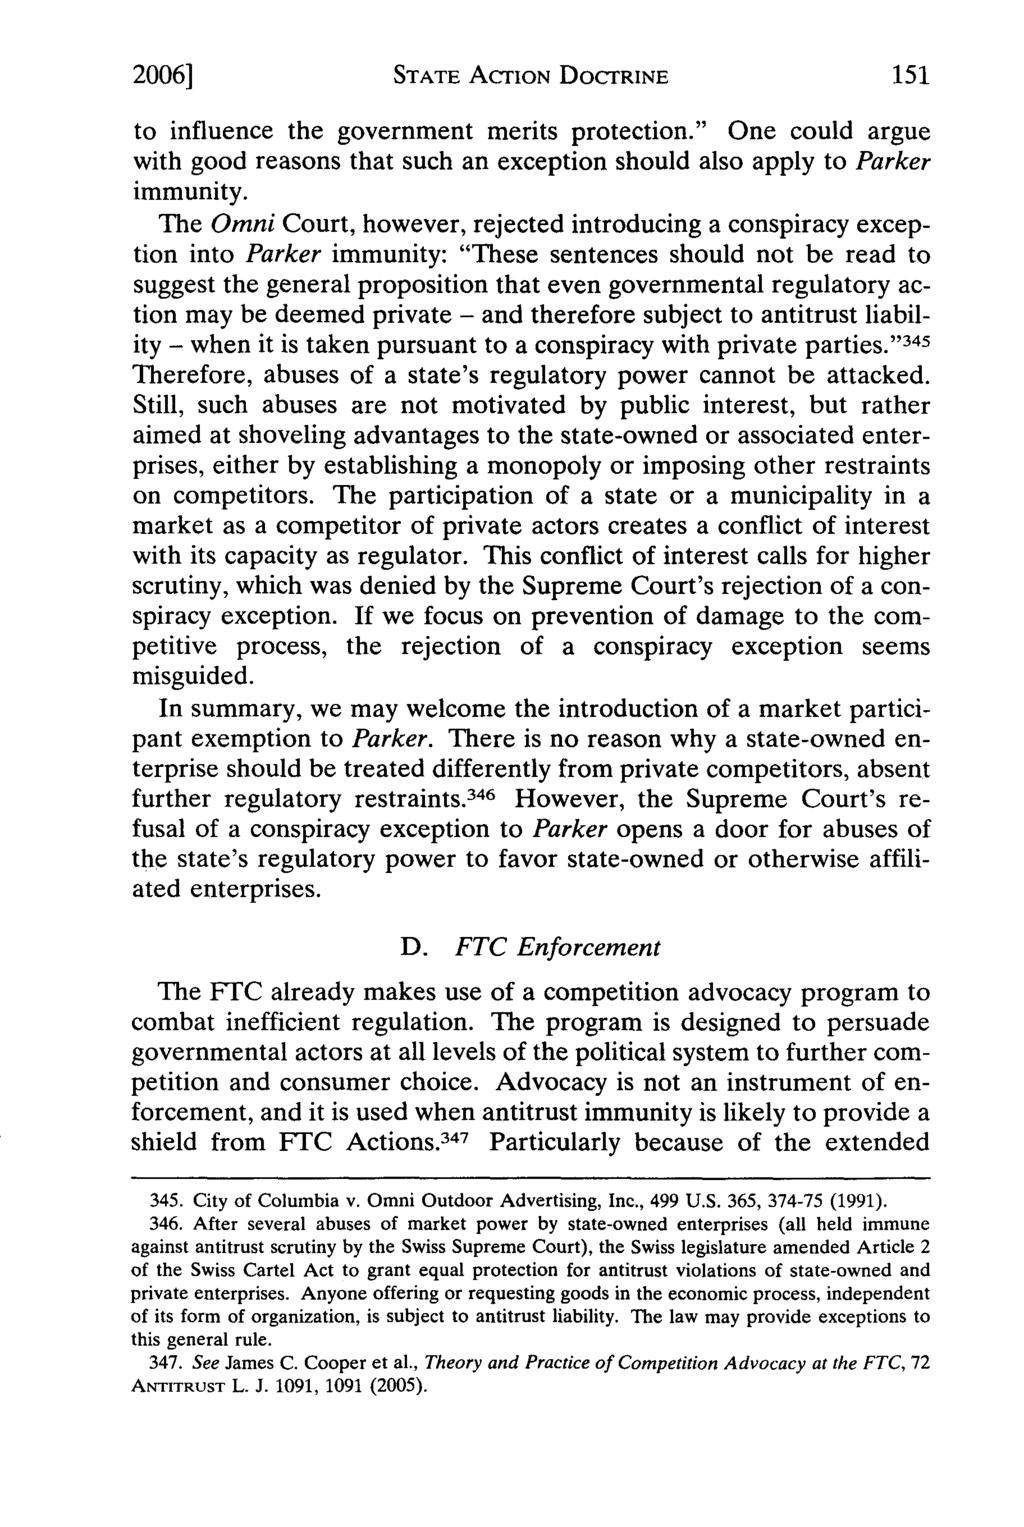 2006] STATE ACTION DOCTRINE to influence the government merits protection." One could argue with good reasons that such an exception should also apply to Parker immunity.